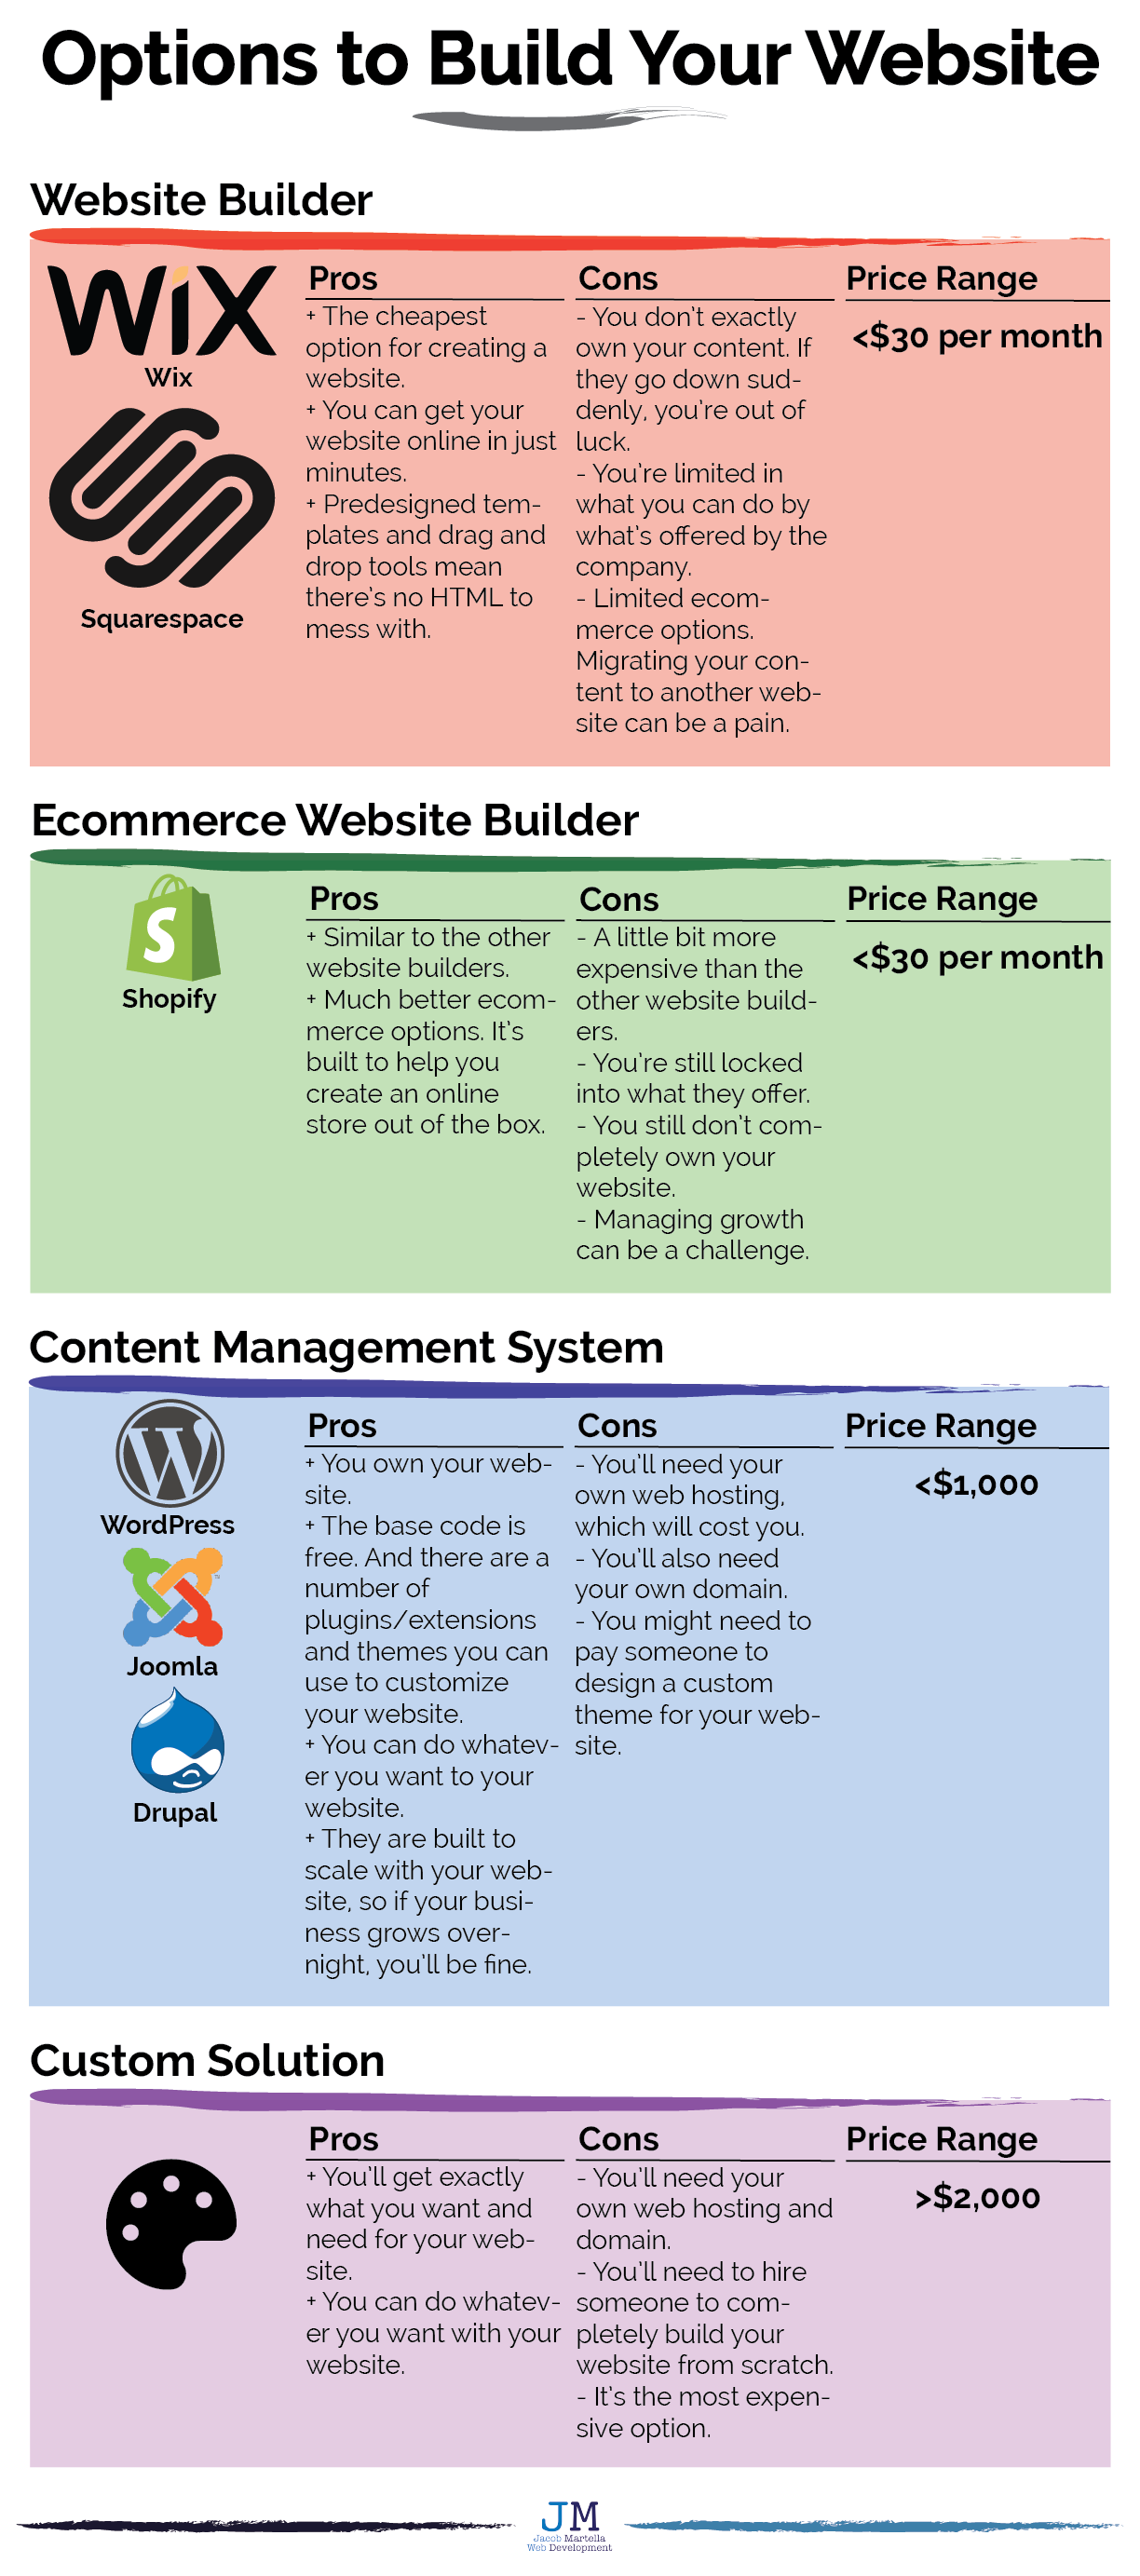 Options to Build Your Website Guide